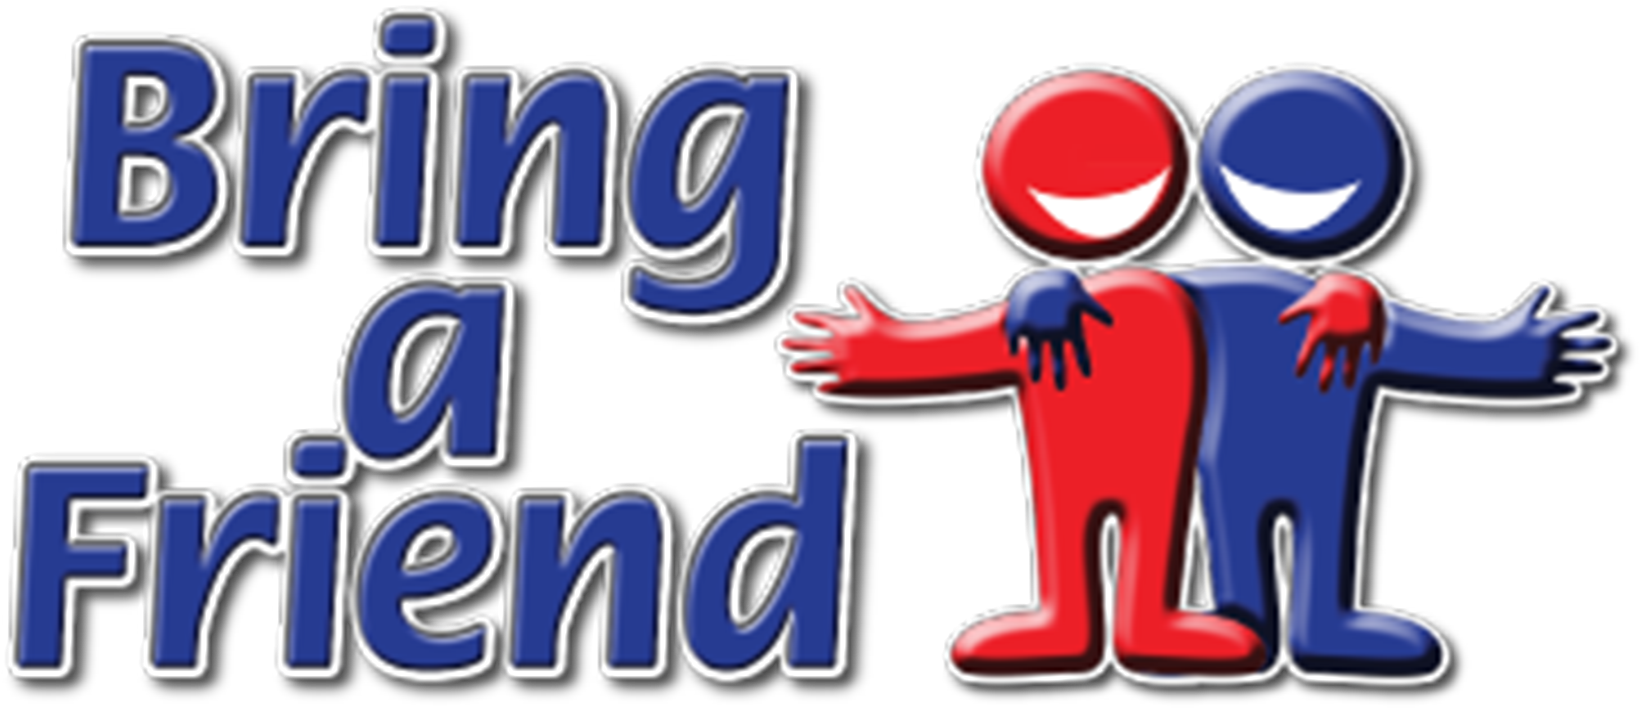 Great News All Of Your Federal And State Financial - Bring A Friend Discount (1800x1050)